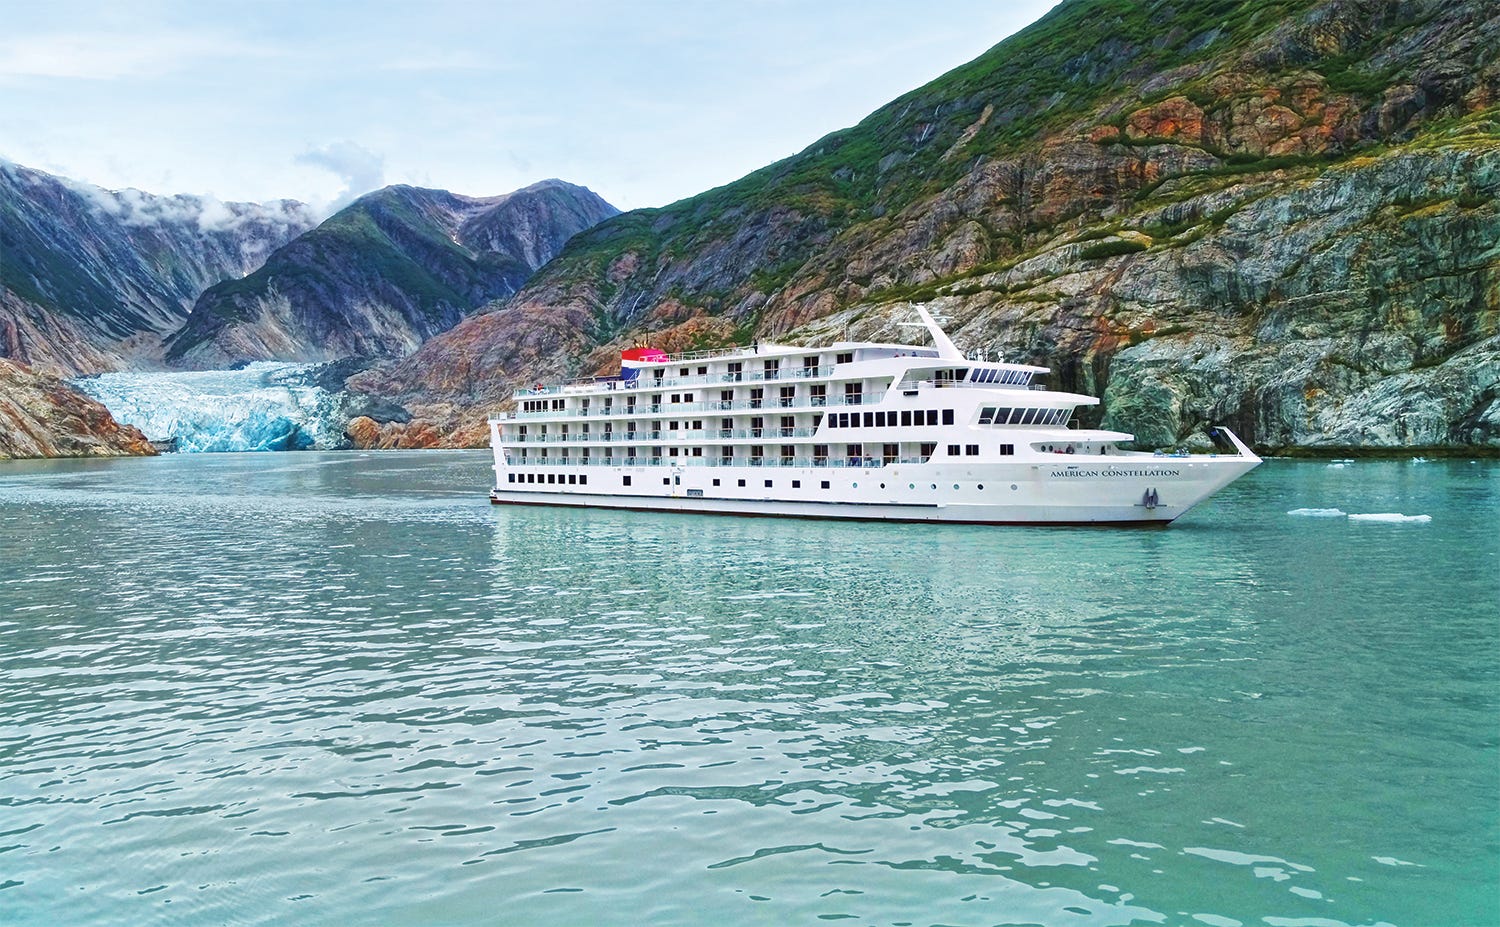 Alaska Cruise Ends Early Due To Covid-19 Infection